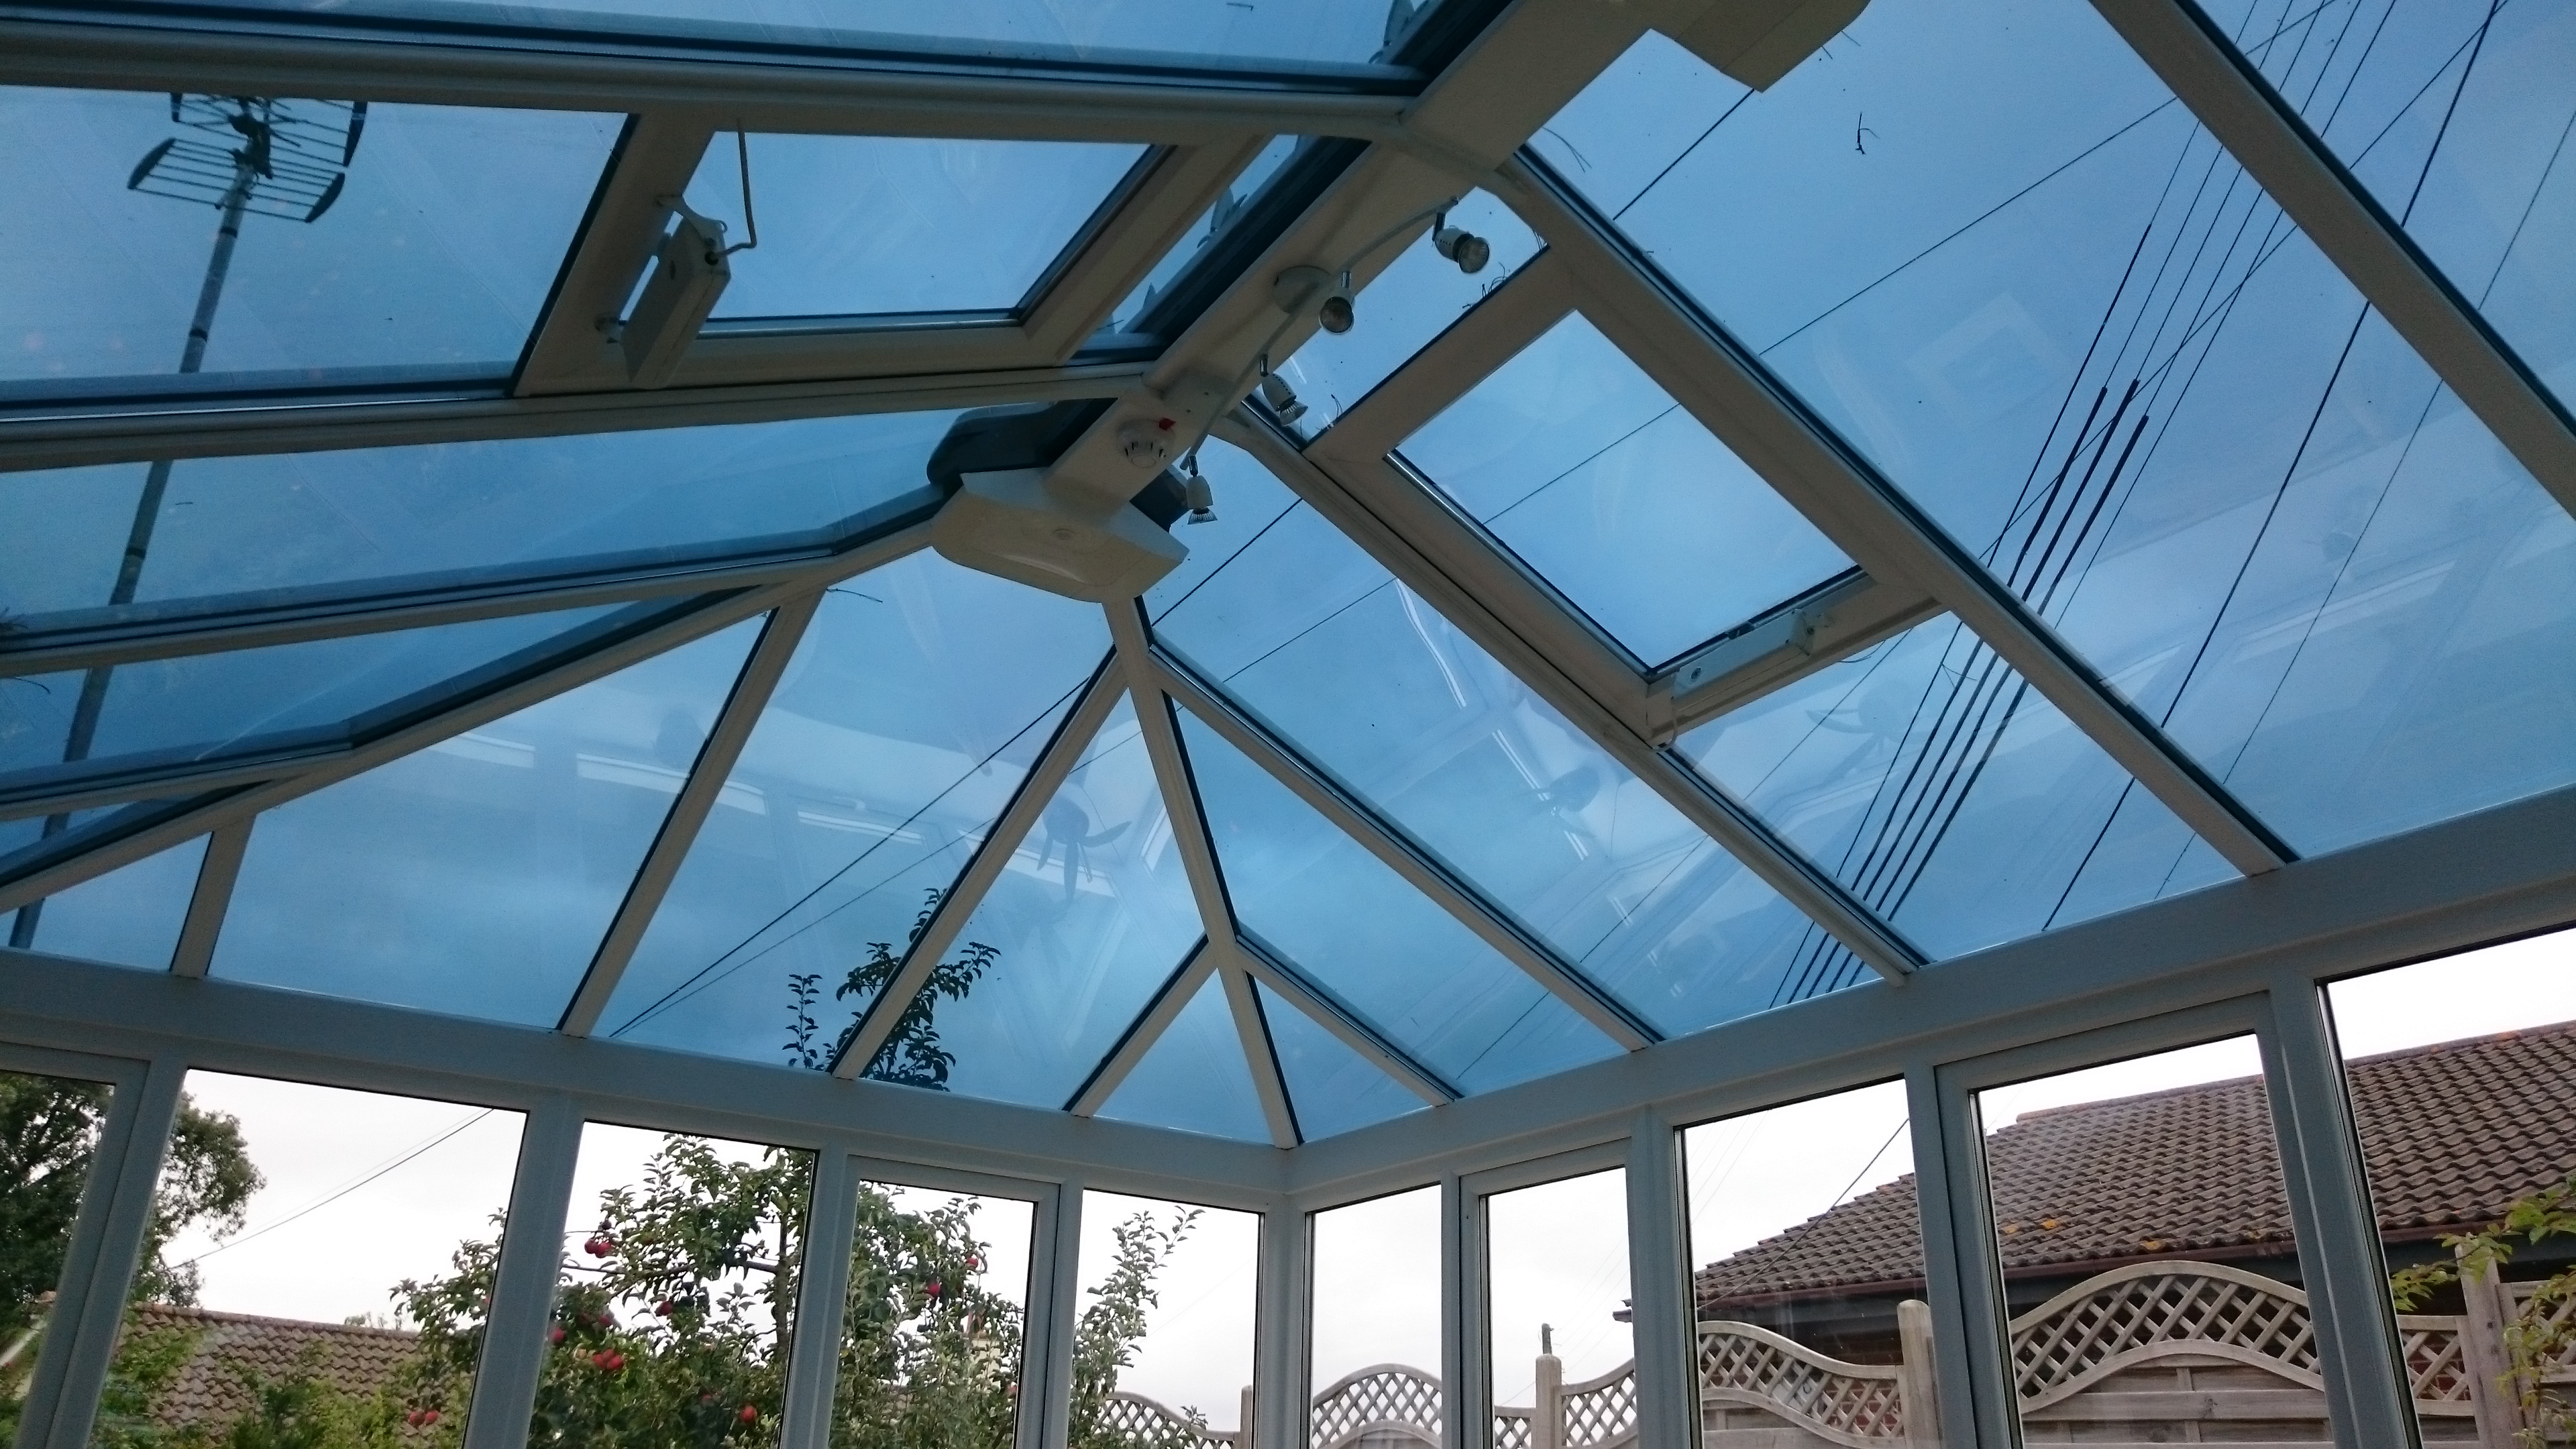 Dual 20V solar window film applied to Active glass conservatory roof by Tinting Express